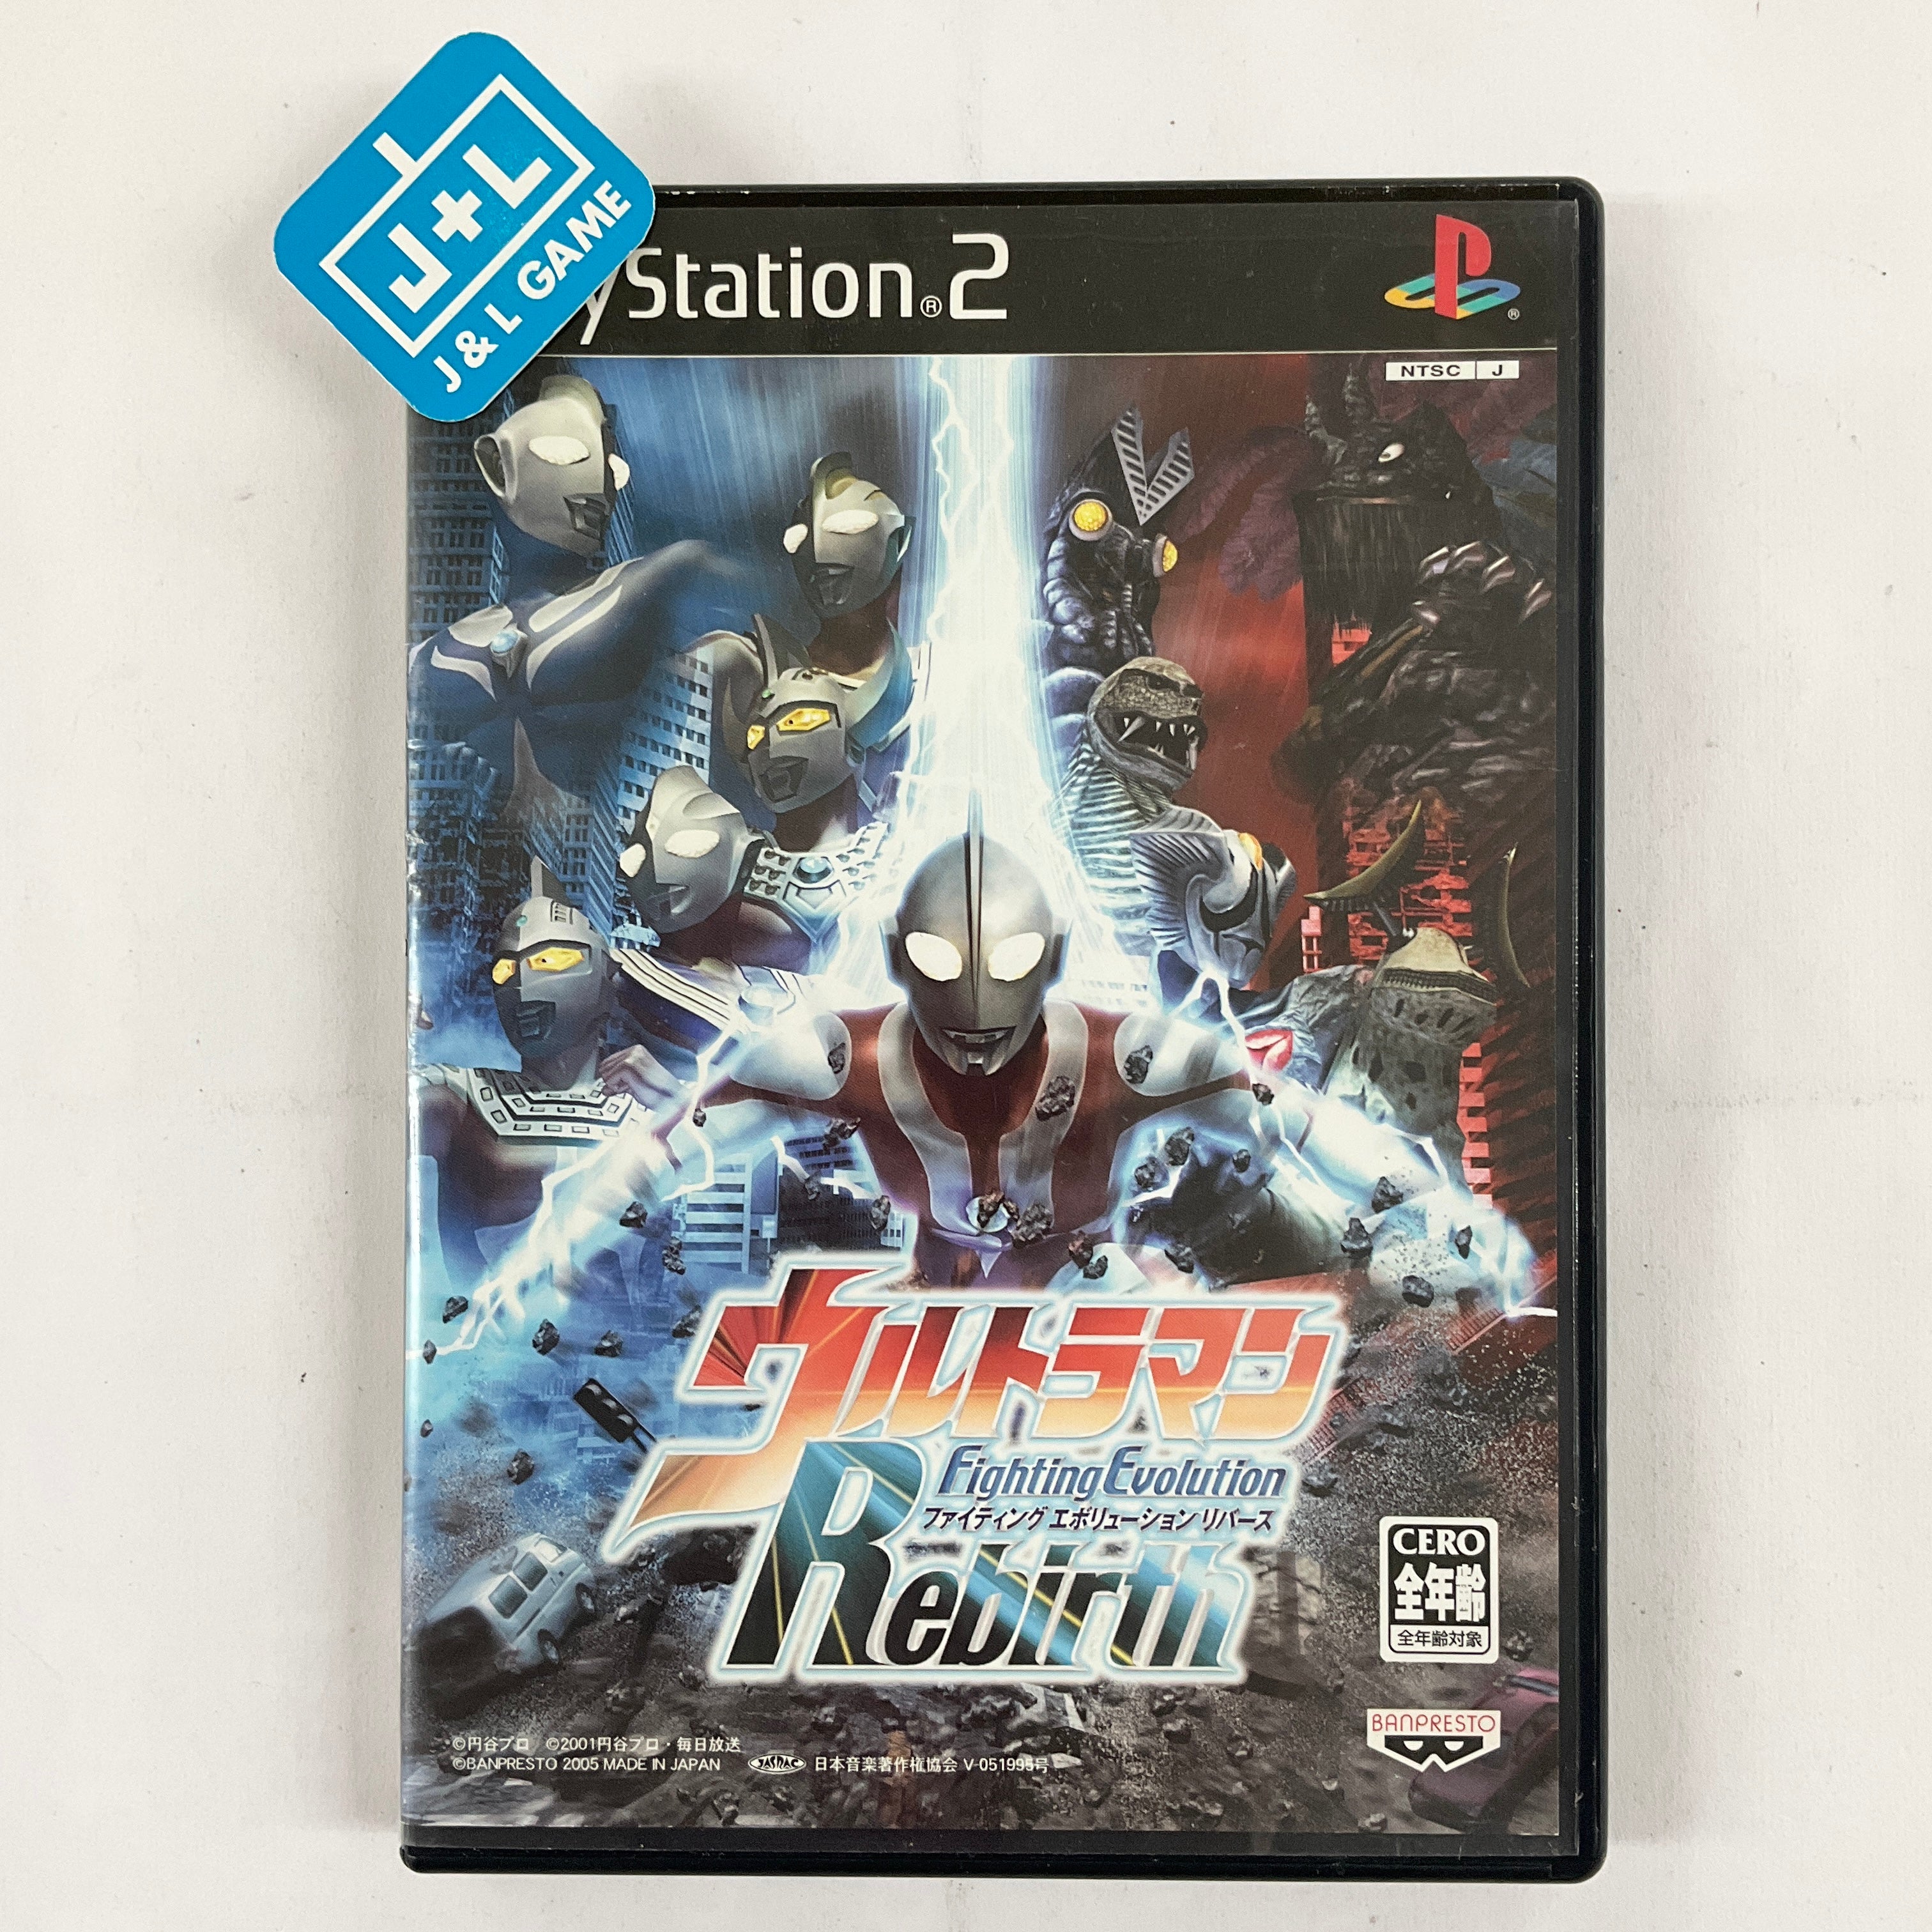 Ultraman Fighting Evolution Rebirth - (PS2) PlayStation 2 [Pre-Owned]  (Japanese Import)